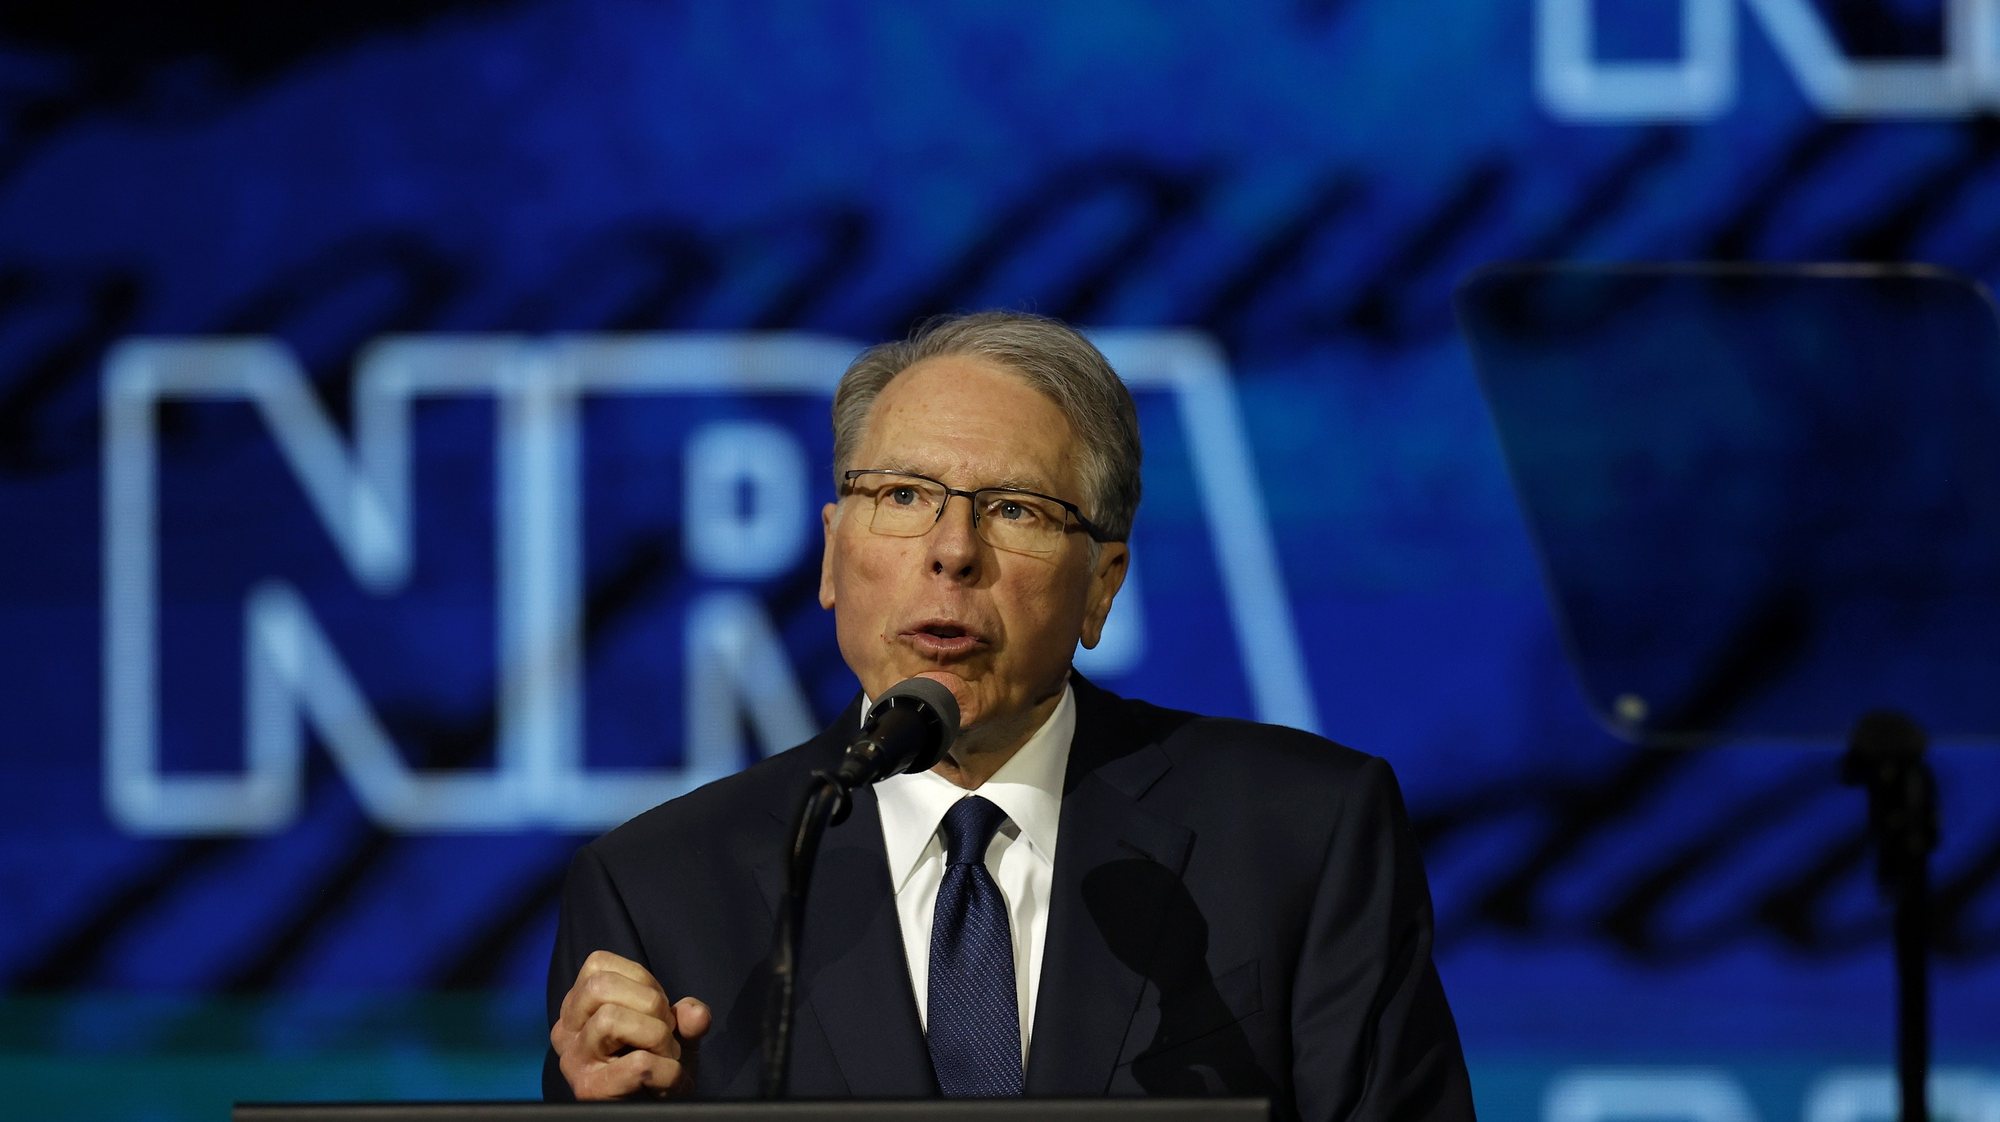 epa09981185 Wayne LaPierre, chief executive of the National Rifle Association (NRA) speaks, during the National Rifle Association’s convention at the George R Brown Convention Center, in Houston, Texas, USA, 27 May 2022. Protests are expected outside the convention which is being held only a few hours away from Uvalde, Texas, where 19 students and two teachers were killed by an 18-year-old gunman who entered their elementary school.  EPA/AARON M. SPRECHER